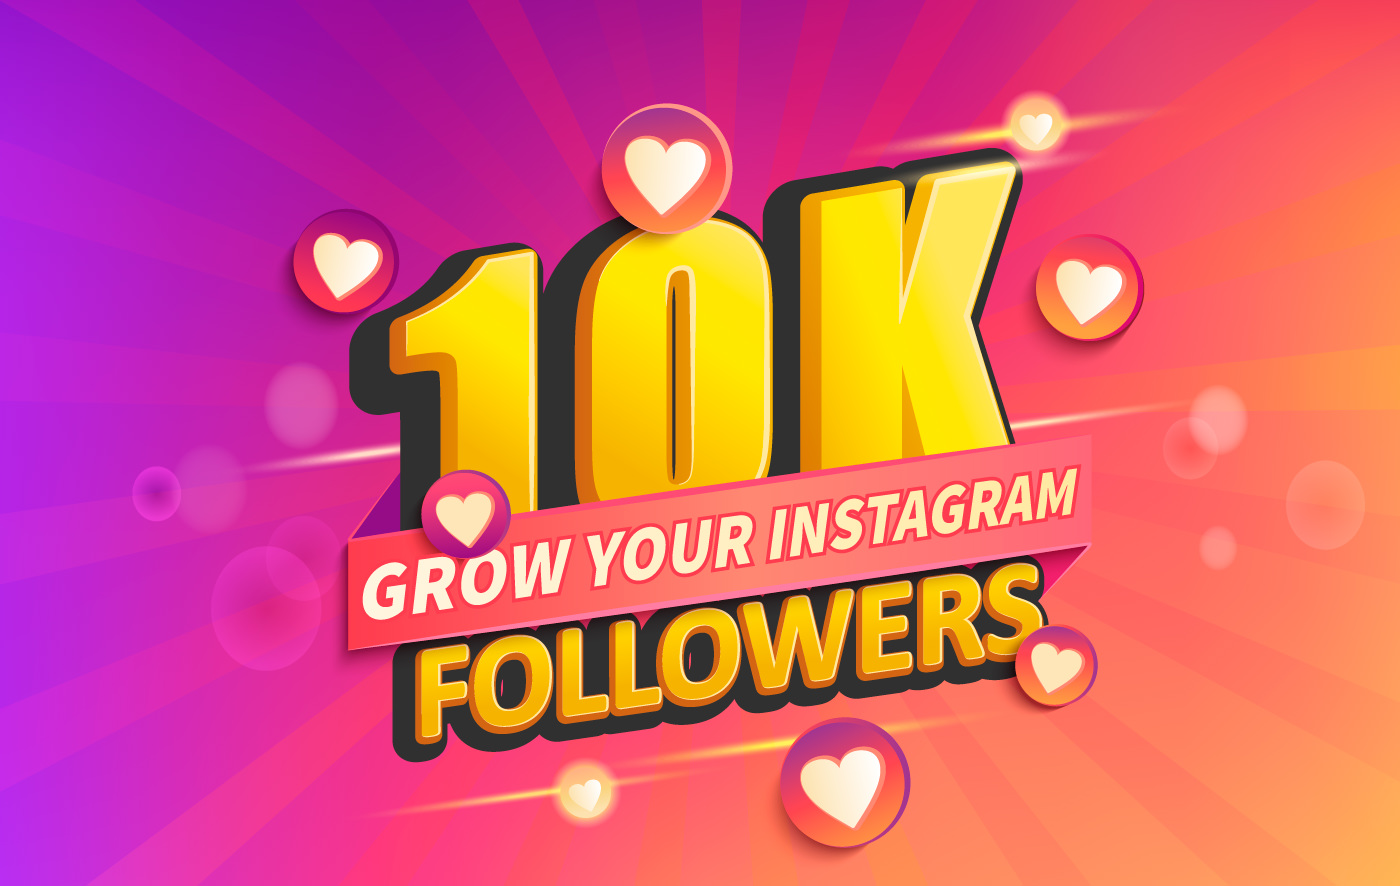 phlearn magazine7 tips to grow your instagram account to 10k followers - h!   ow to gain instagram followers from scratch